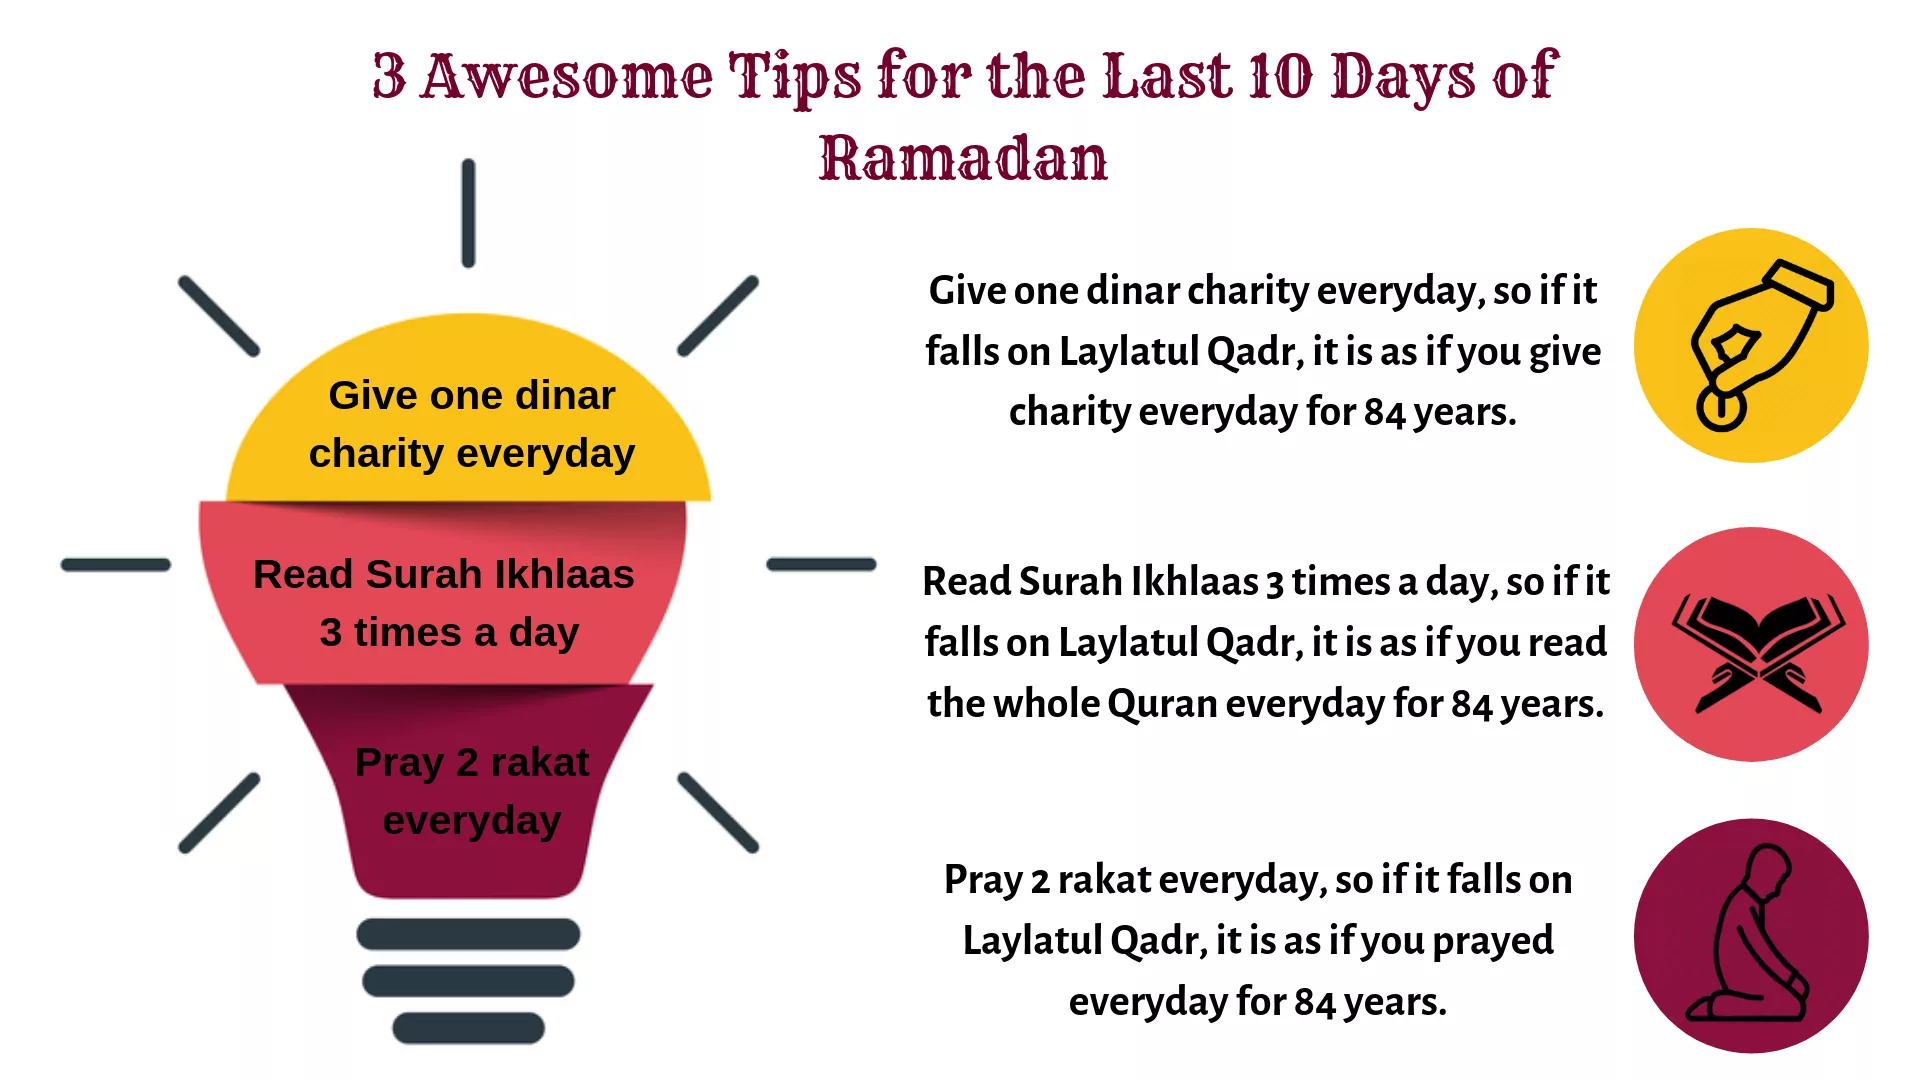 3 Awesome Tips for the Last 10 Days of Ramadan